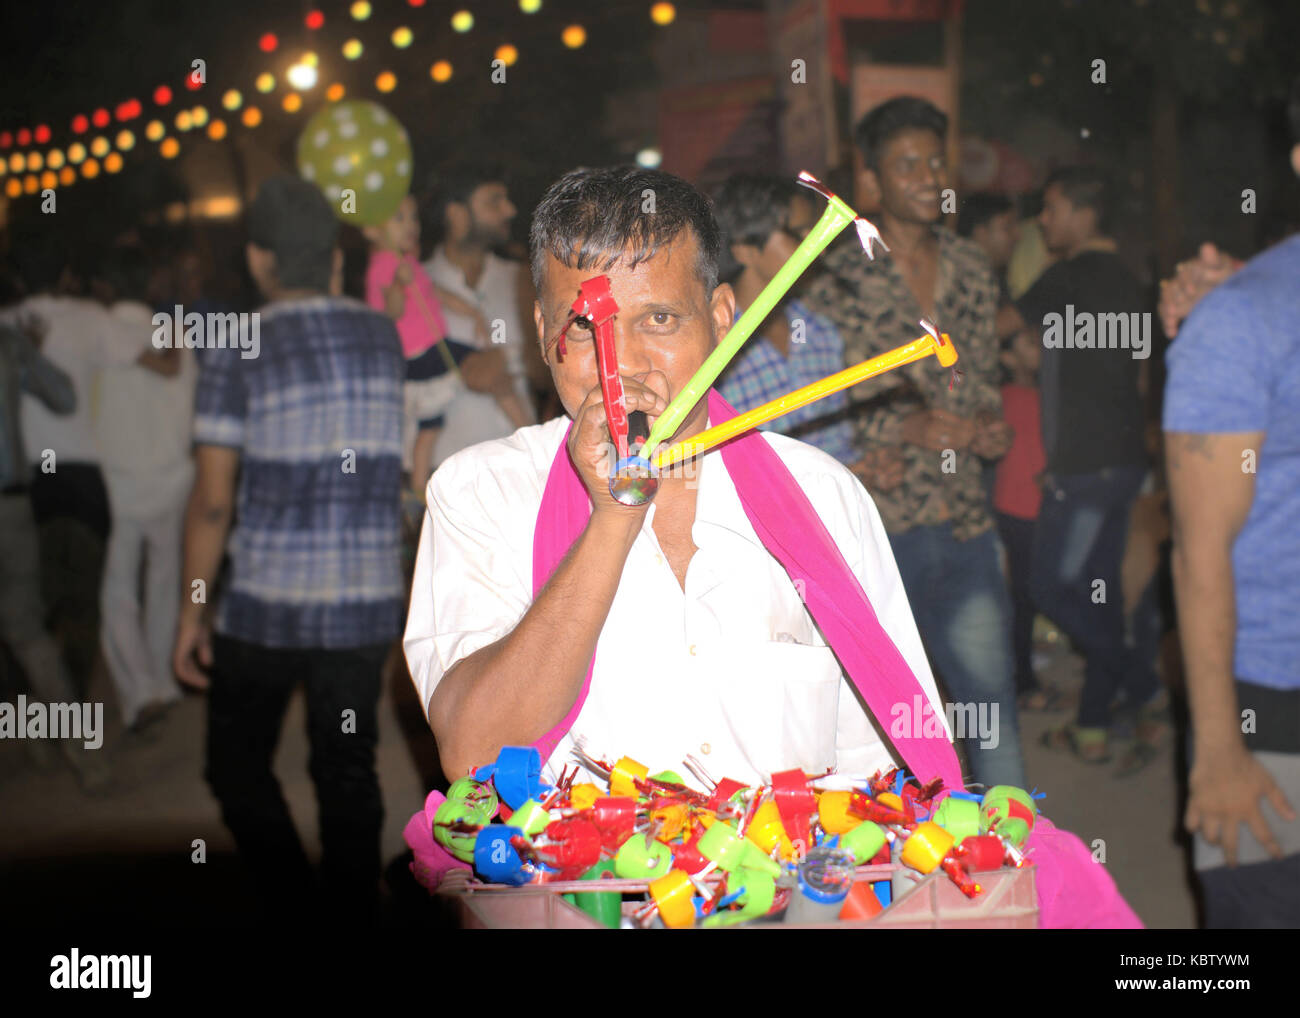 Indian Man selling toys for kids on the street of Delhi, India. People walking in background. Stock Photo